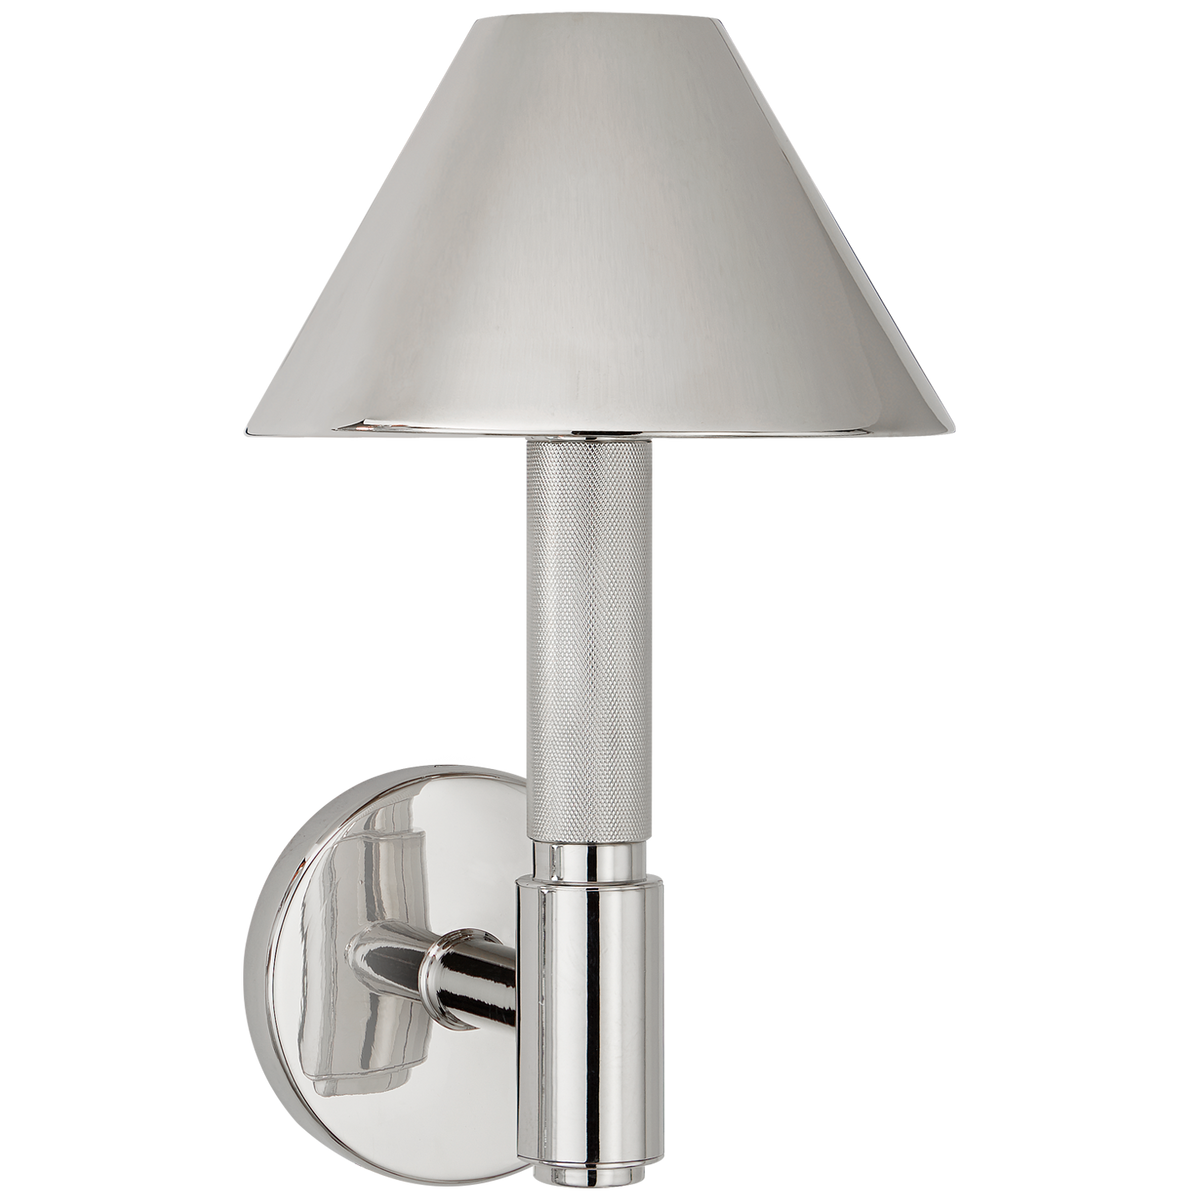 Barrett Sconce Small Single Knurled with Shade - Polished Nickel